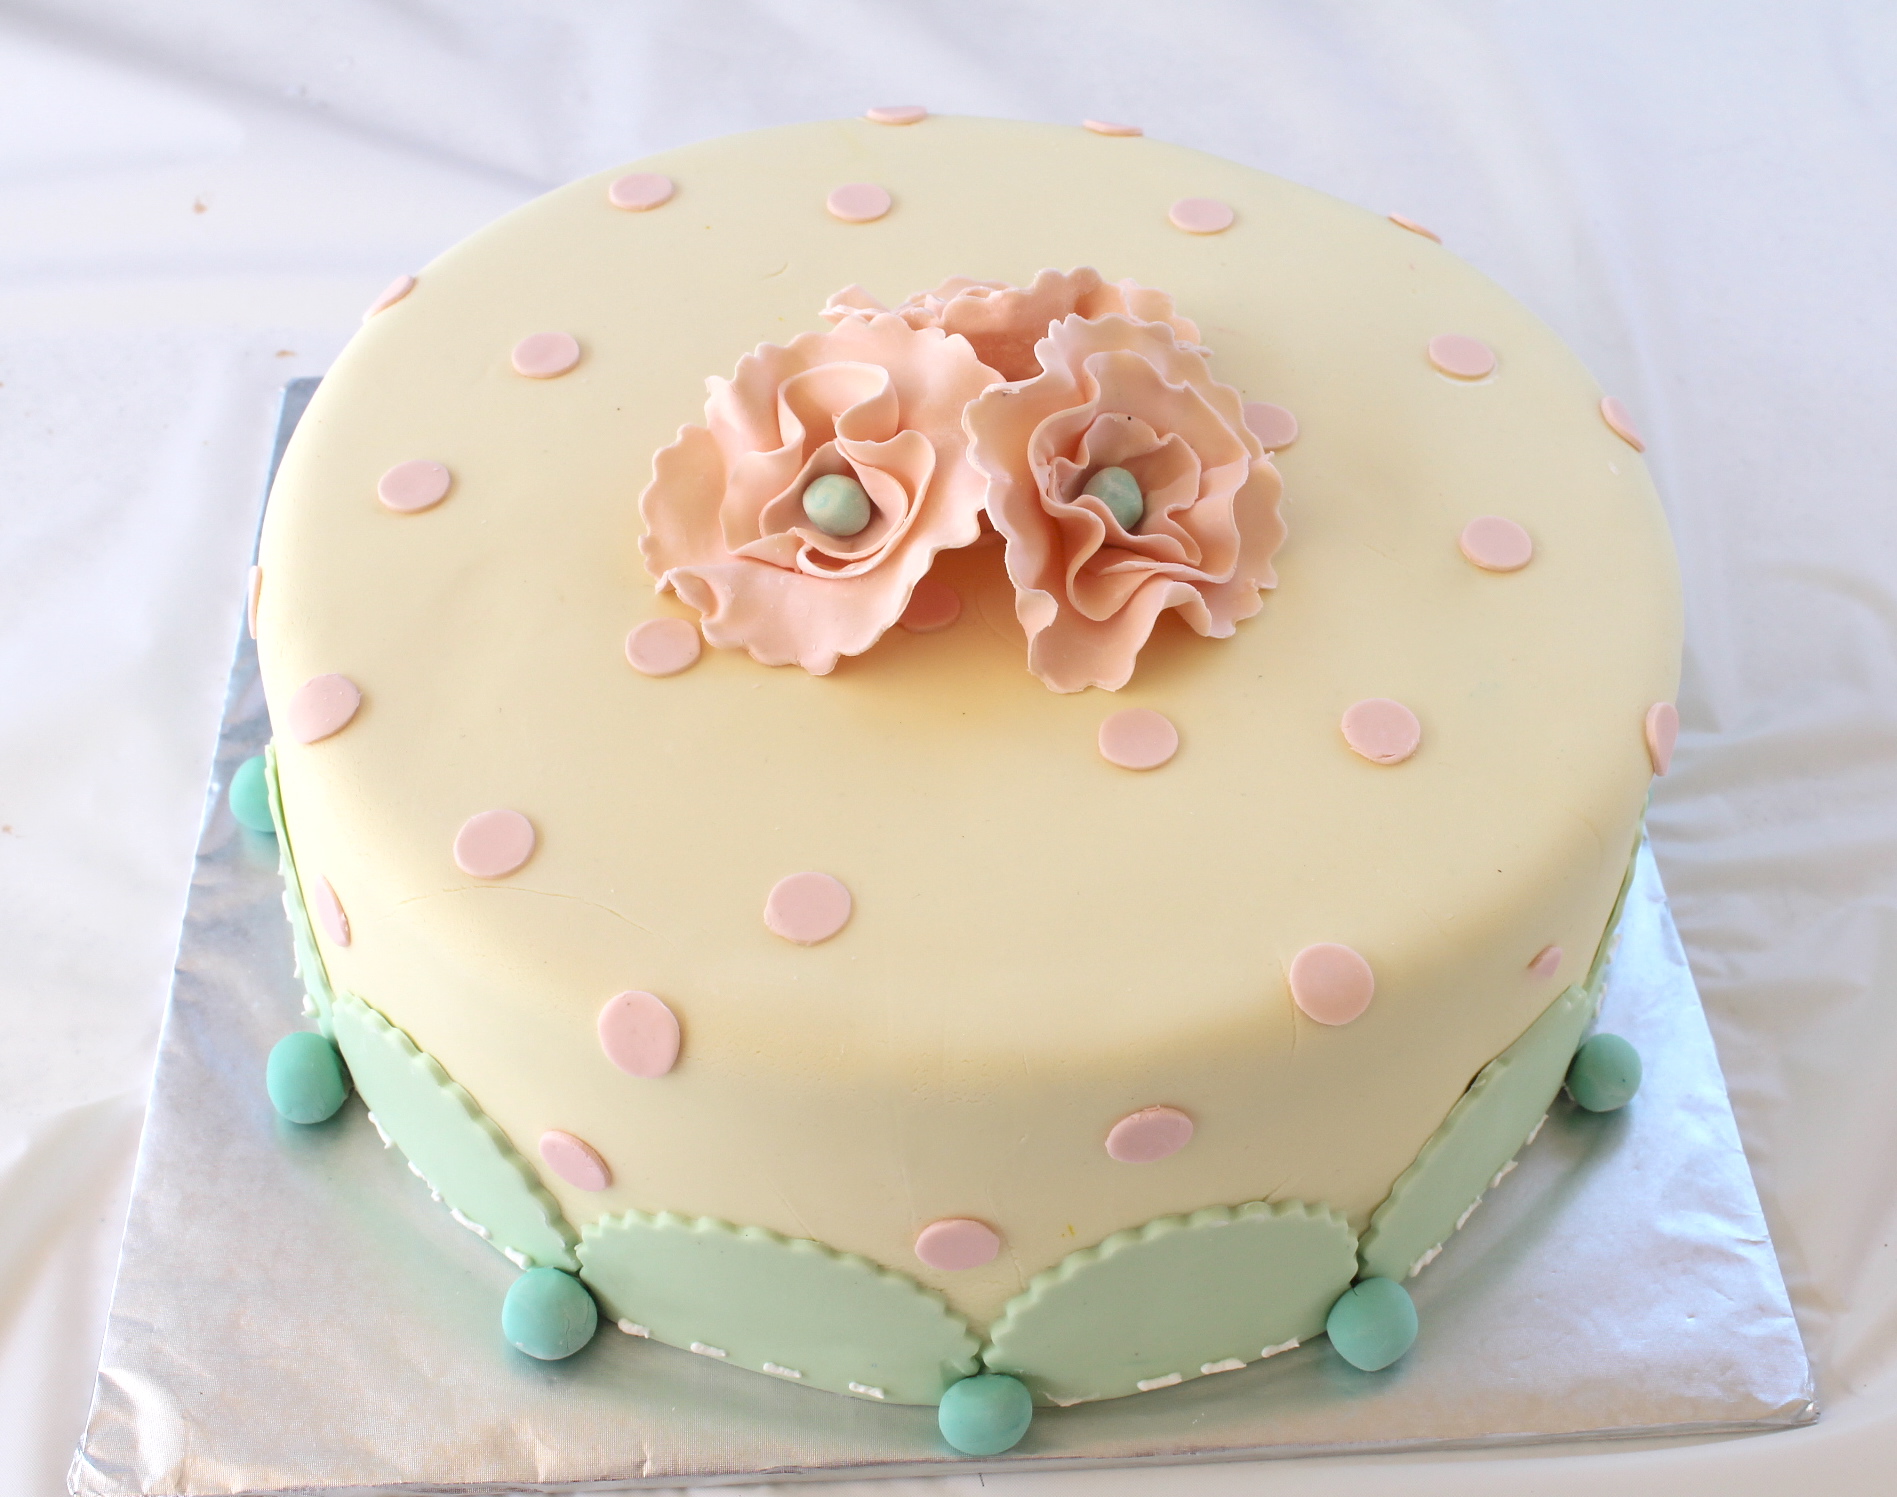 Cake Art: Sweet and Simple Baby Shower Cake